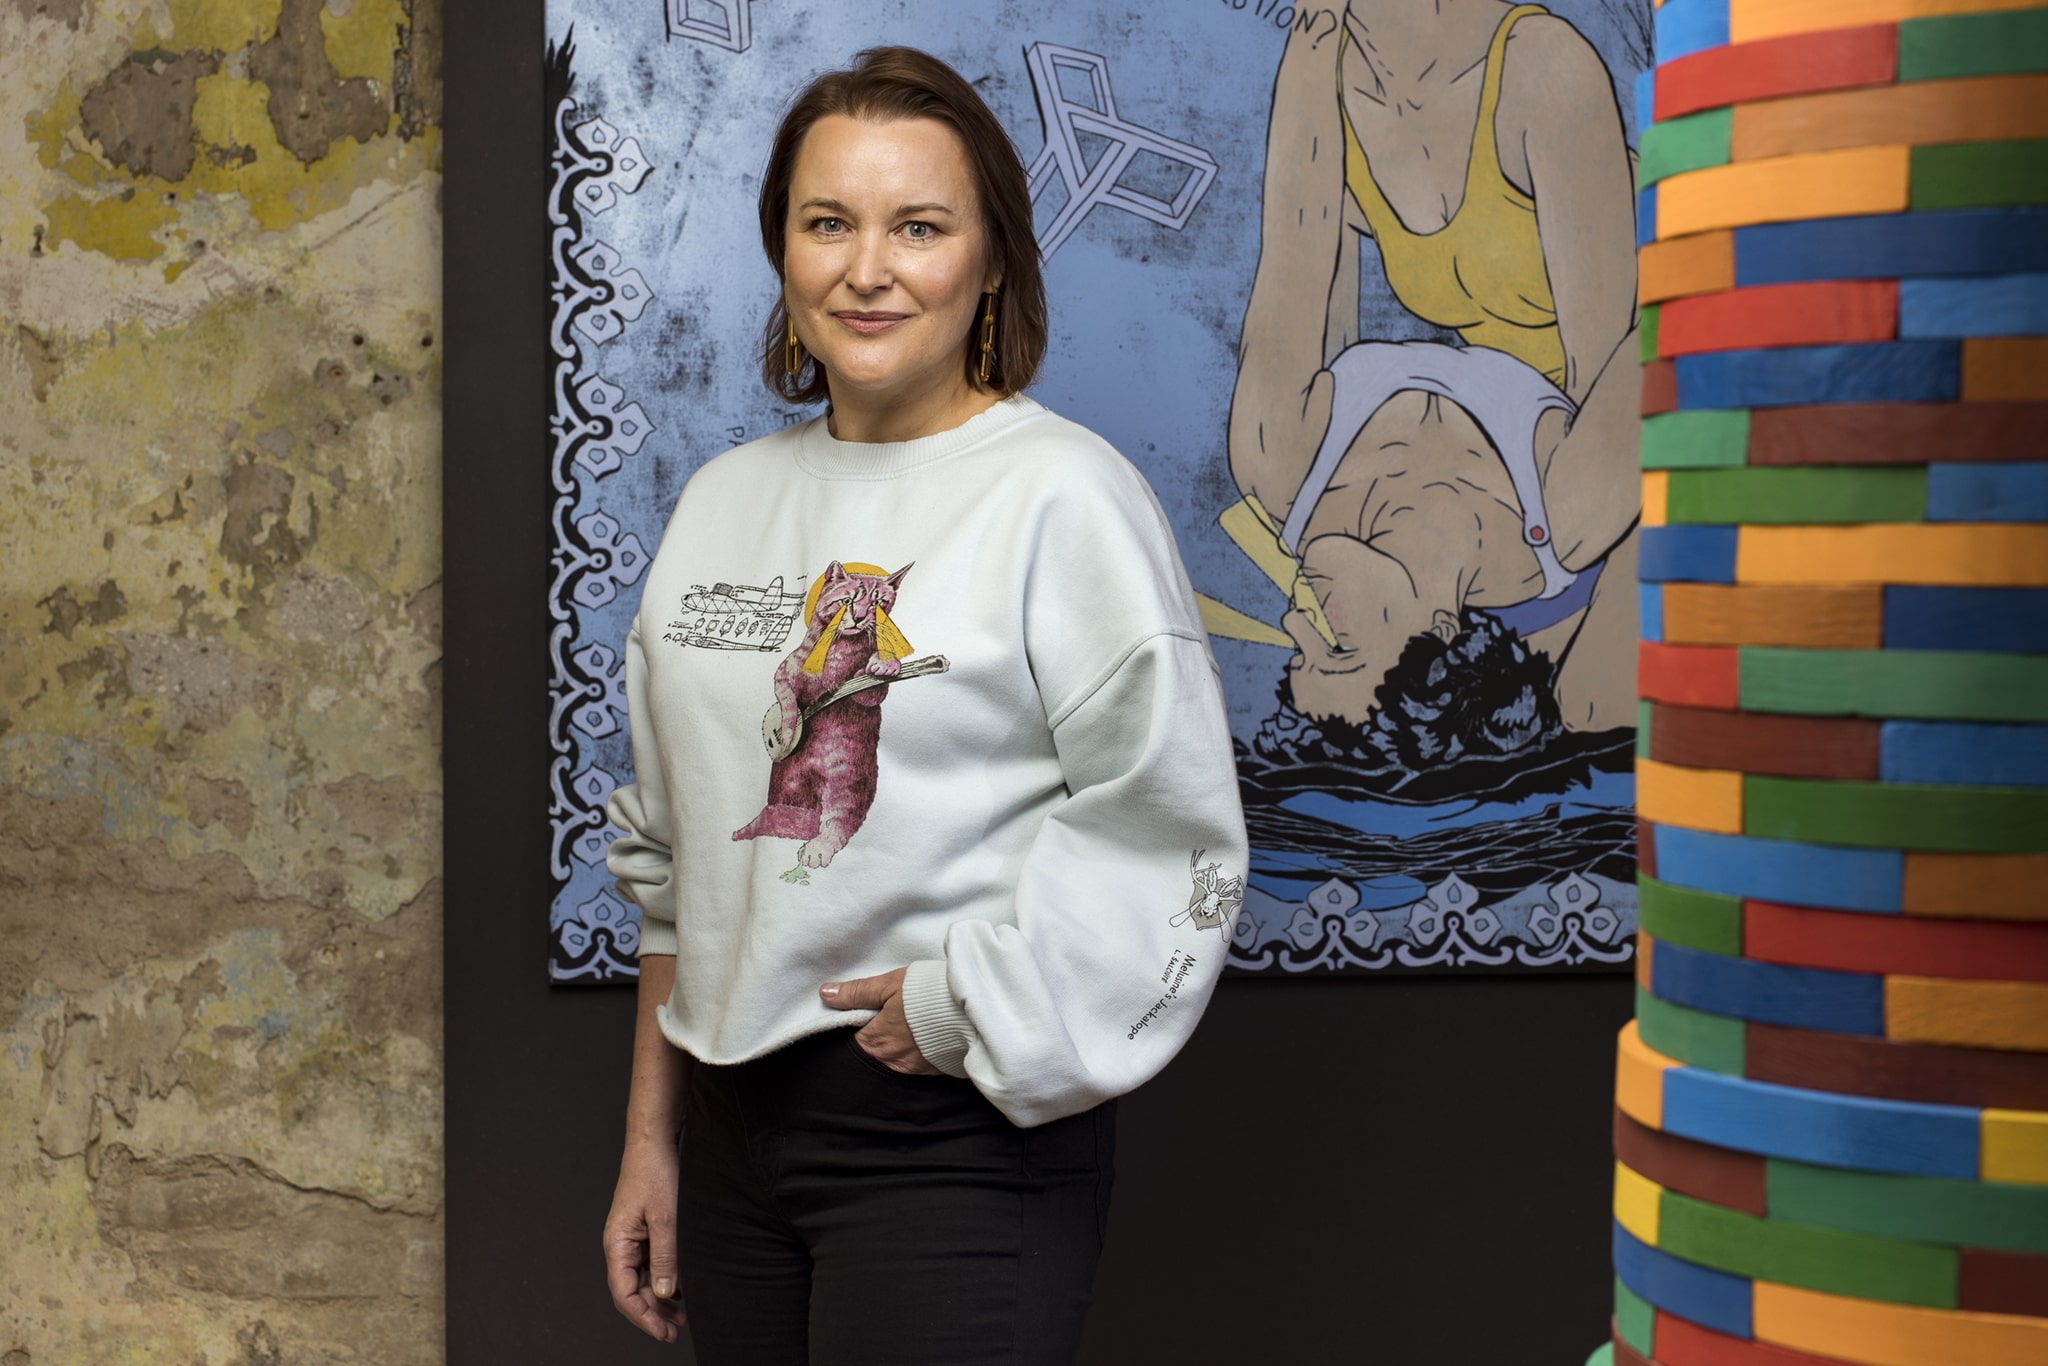 Limited edition sweatshirt, designed by Contour Art Gallery